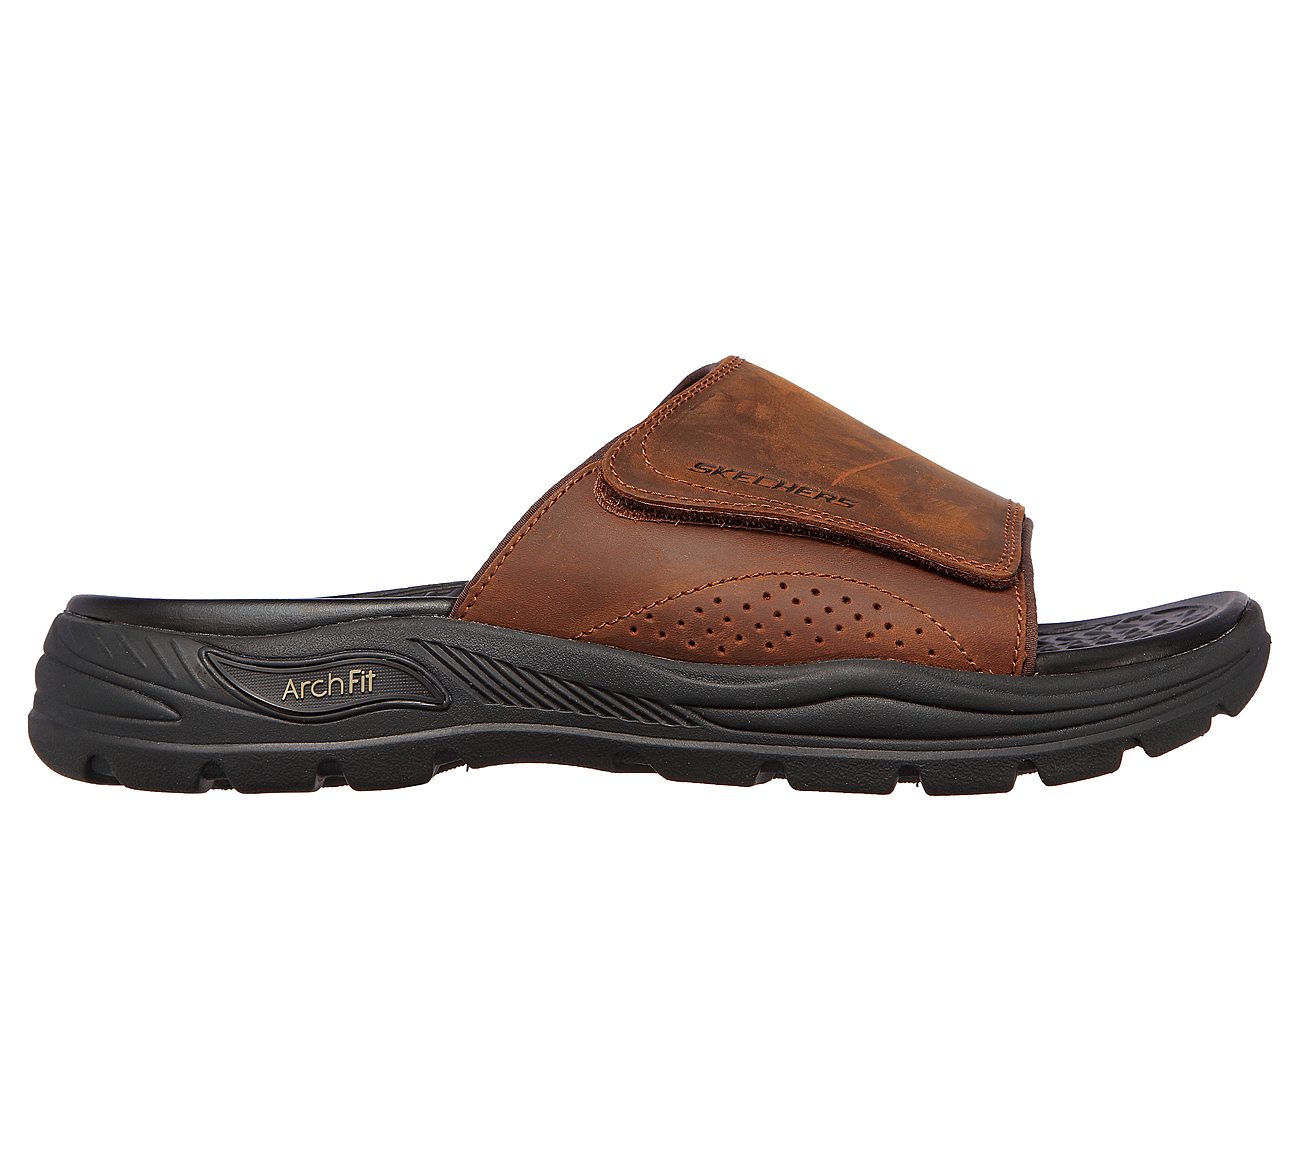 ARCH FIT MOTLEY SD - REVELO, DARK BROWN Footwear Right View